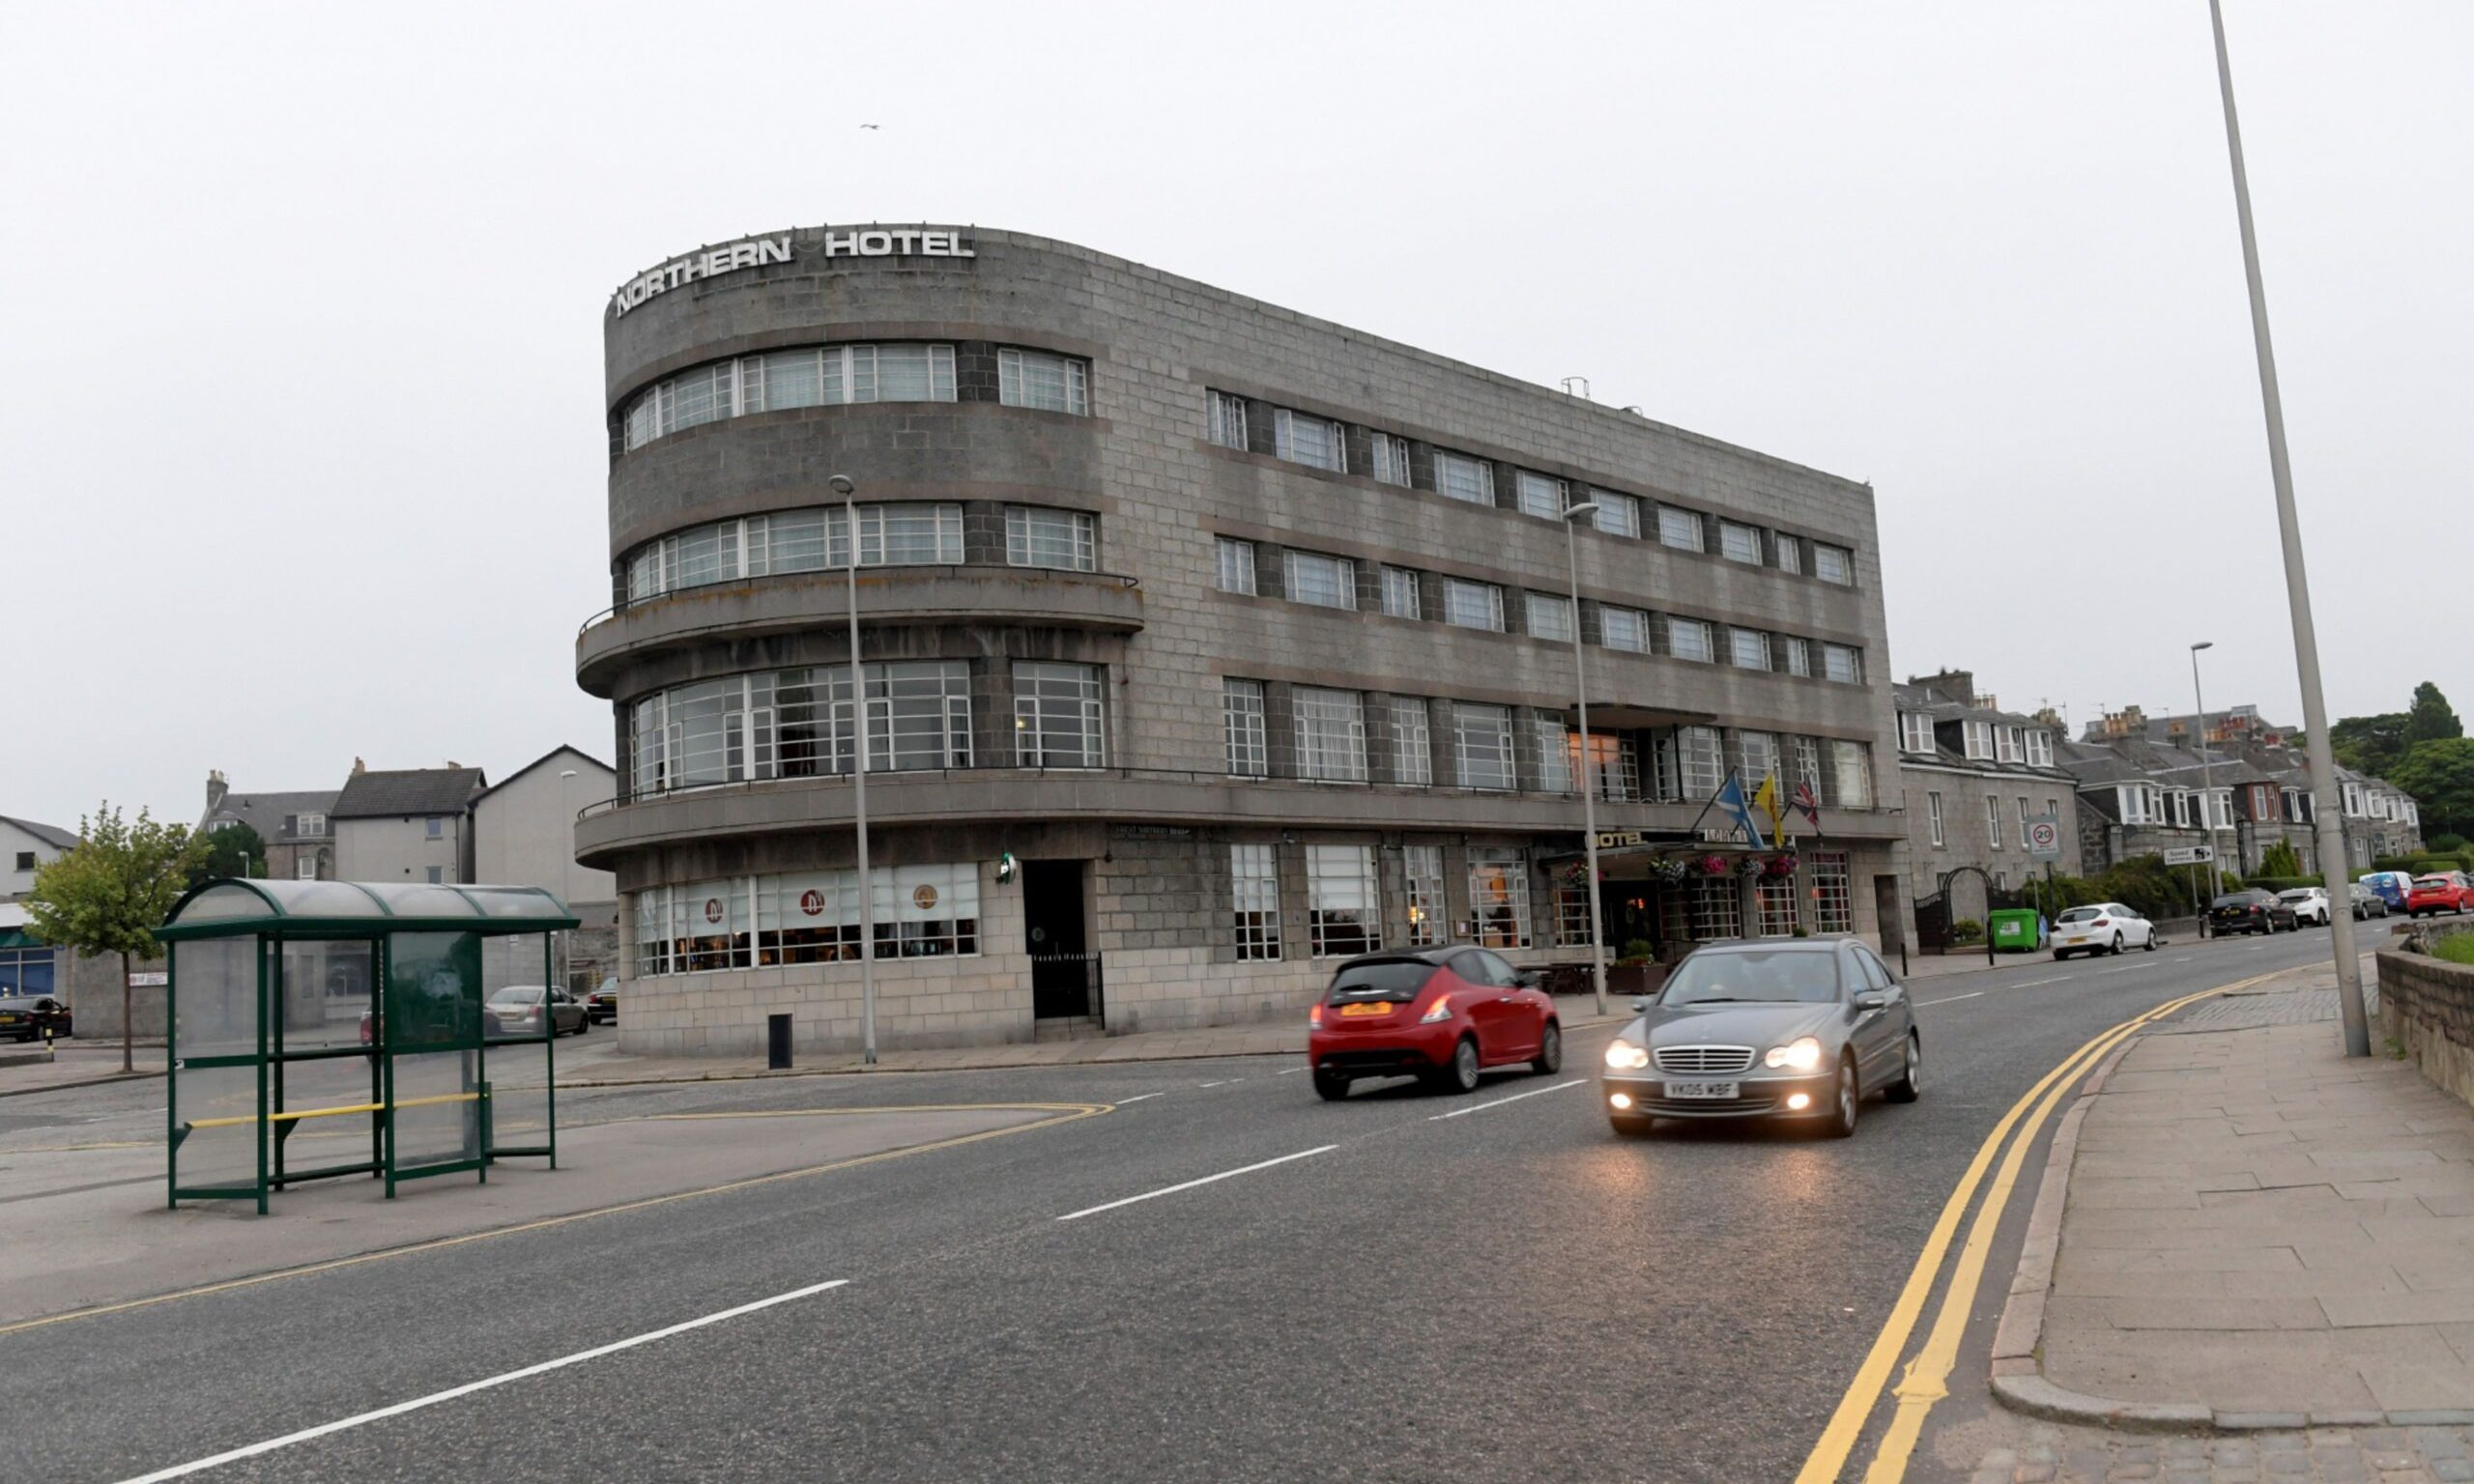 Aberdeen Northern Hotel on Great Northern Road, which could be turned into student flats.